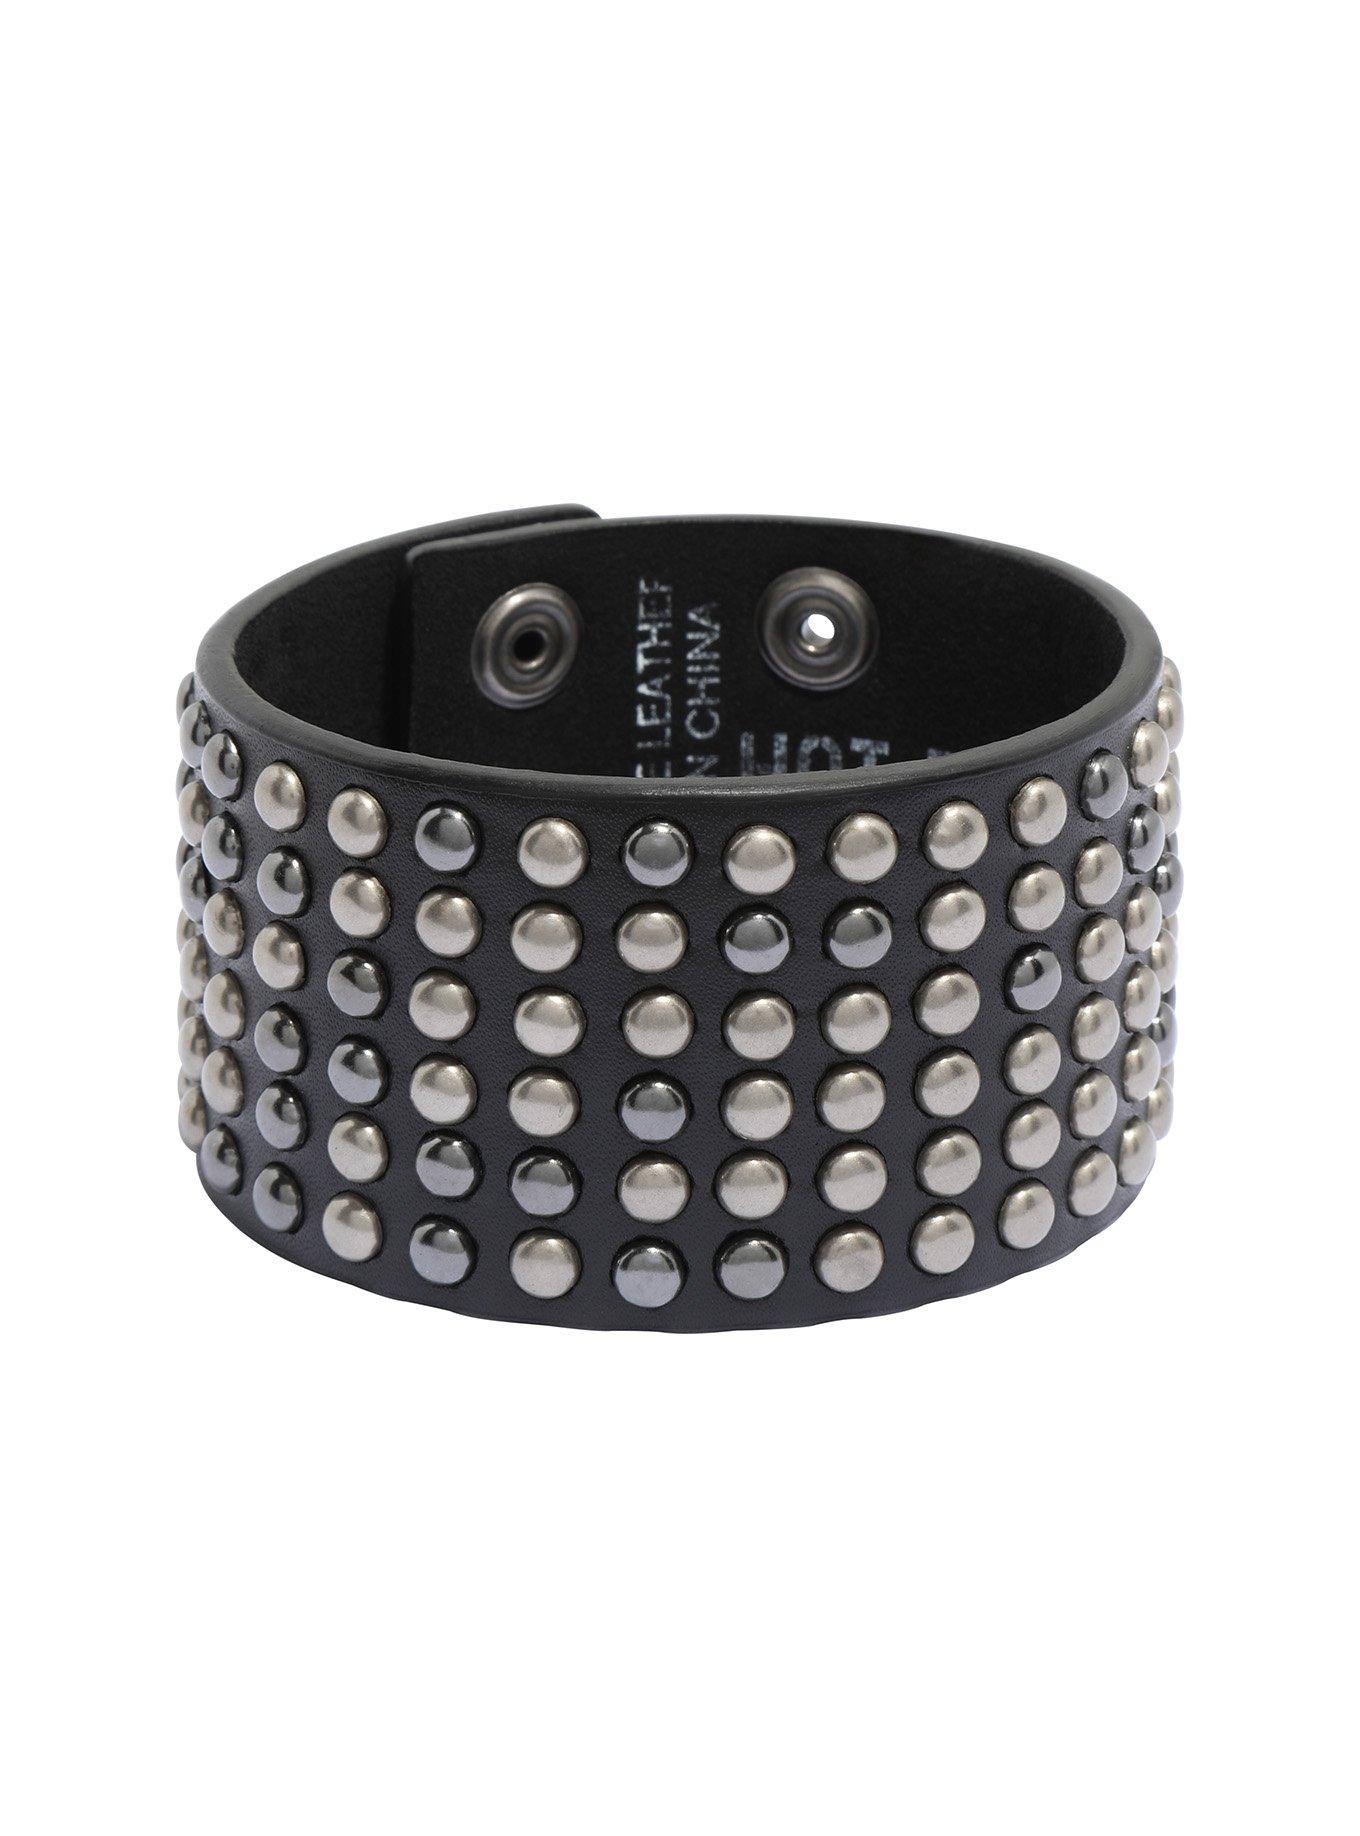 Black Faux Leather 6 Row Round Stud Cuff, , hi-res